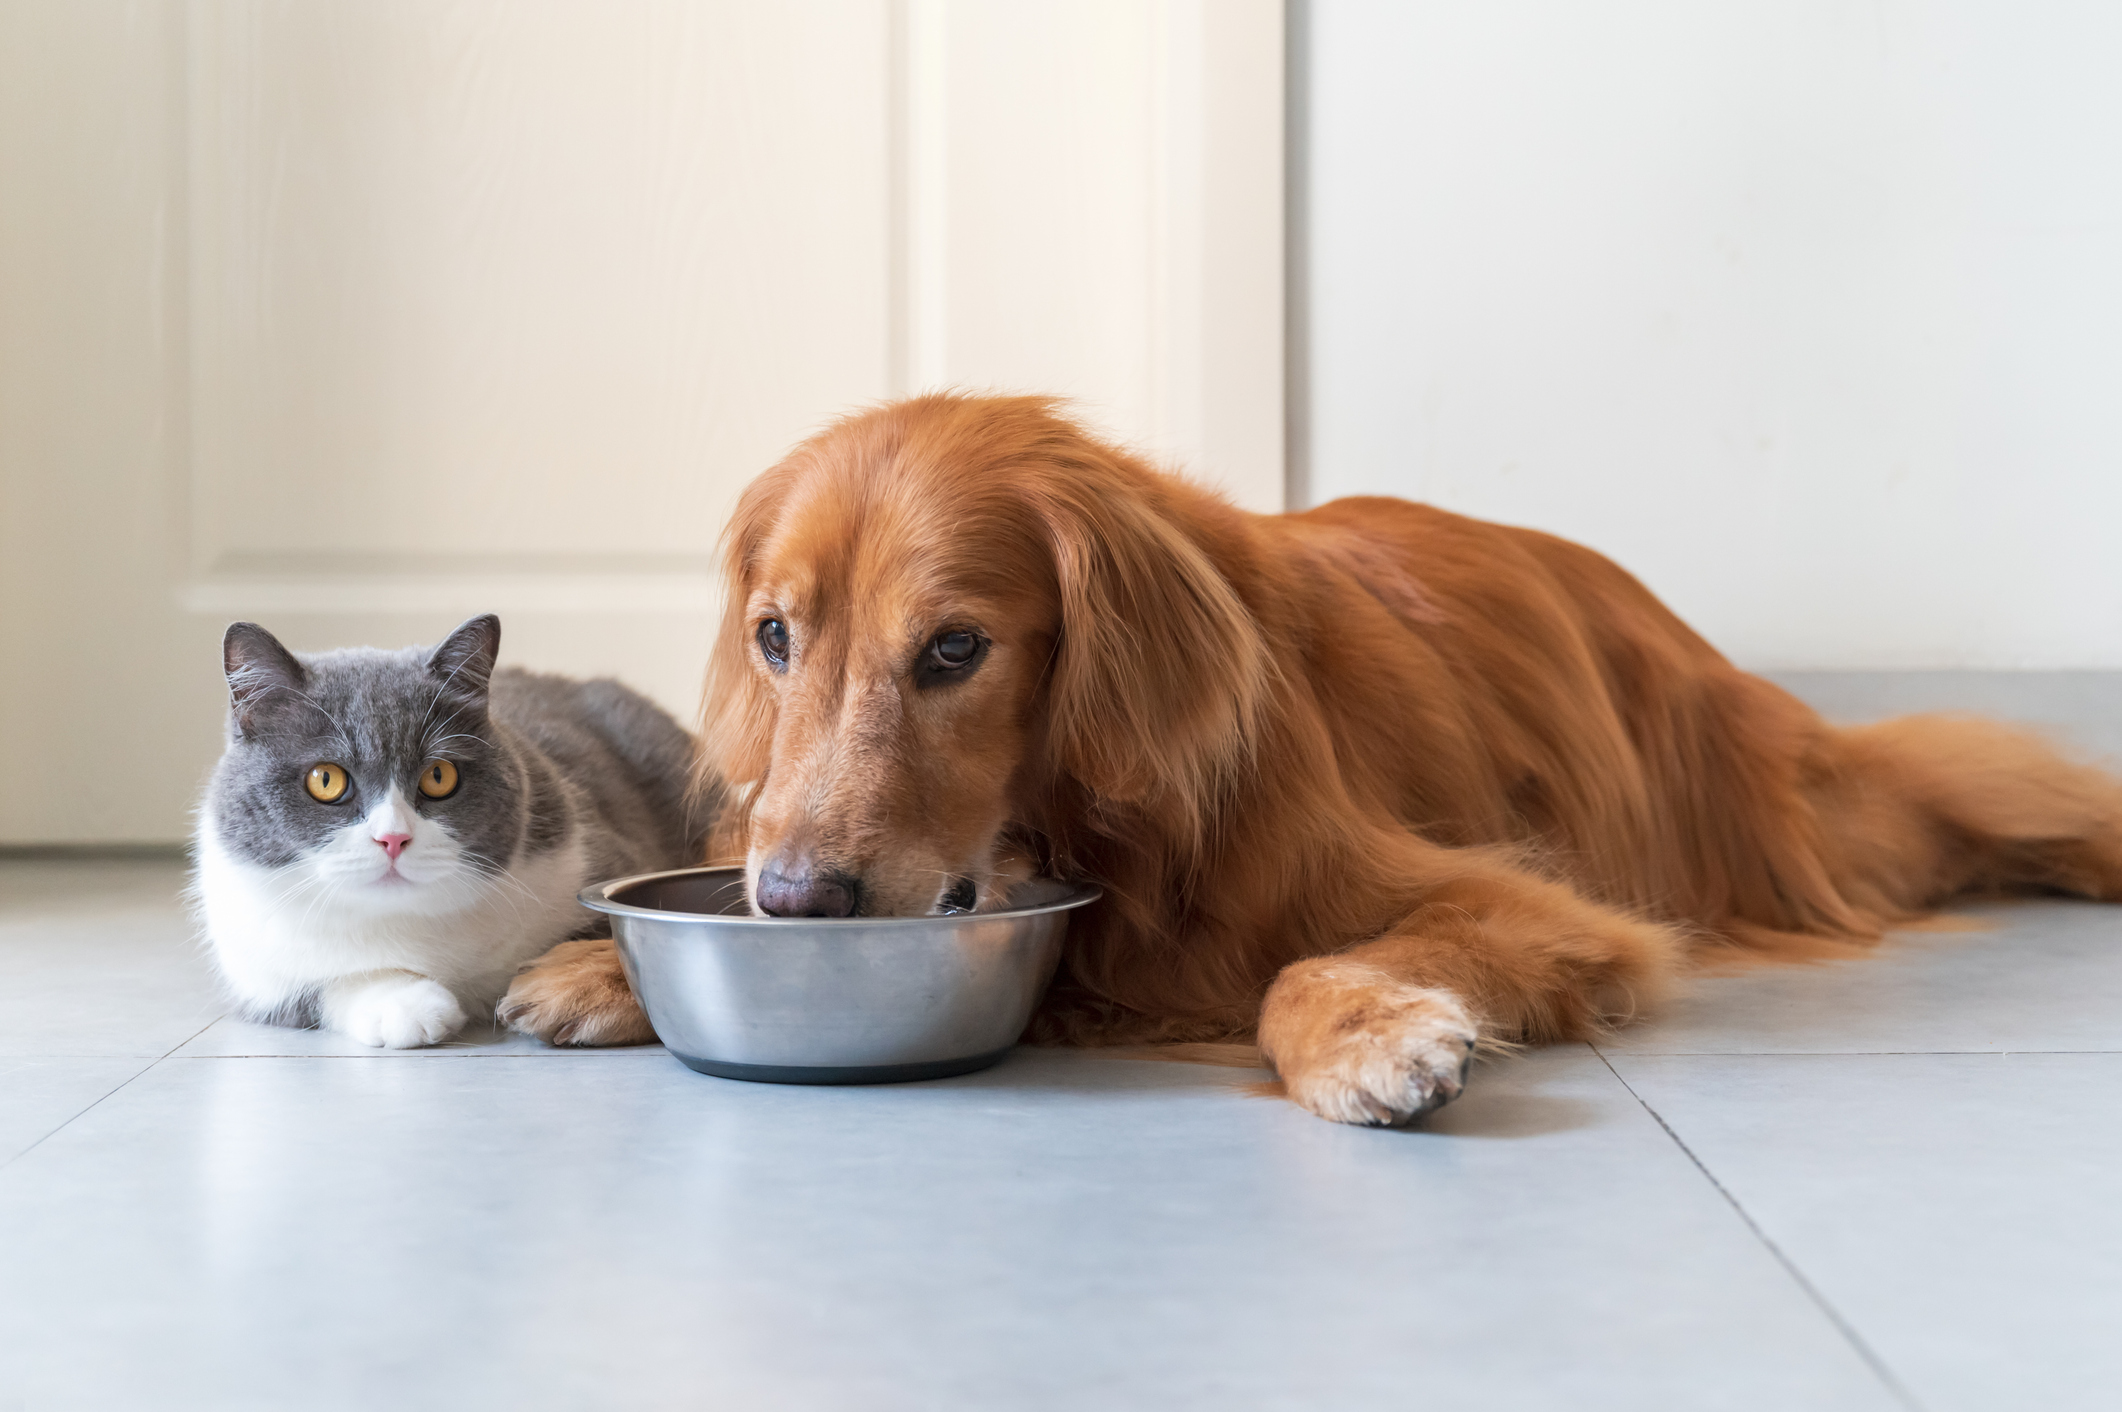 Golden Retriever drinking from a water bowl next to a British Shorthair cat